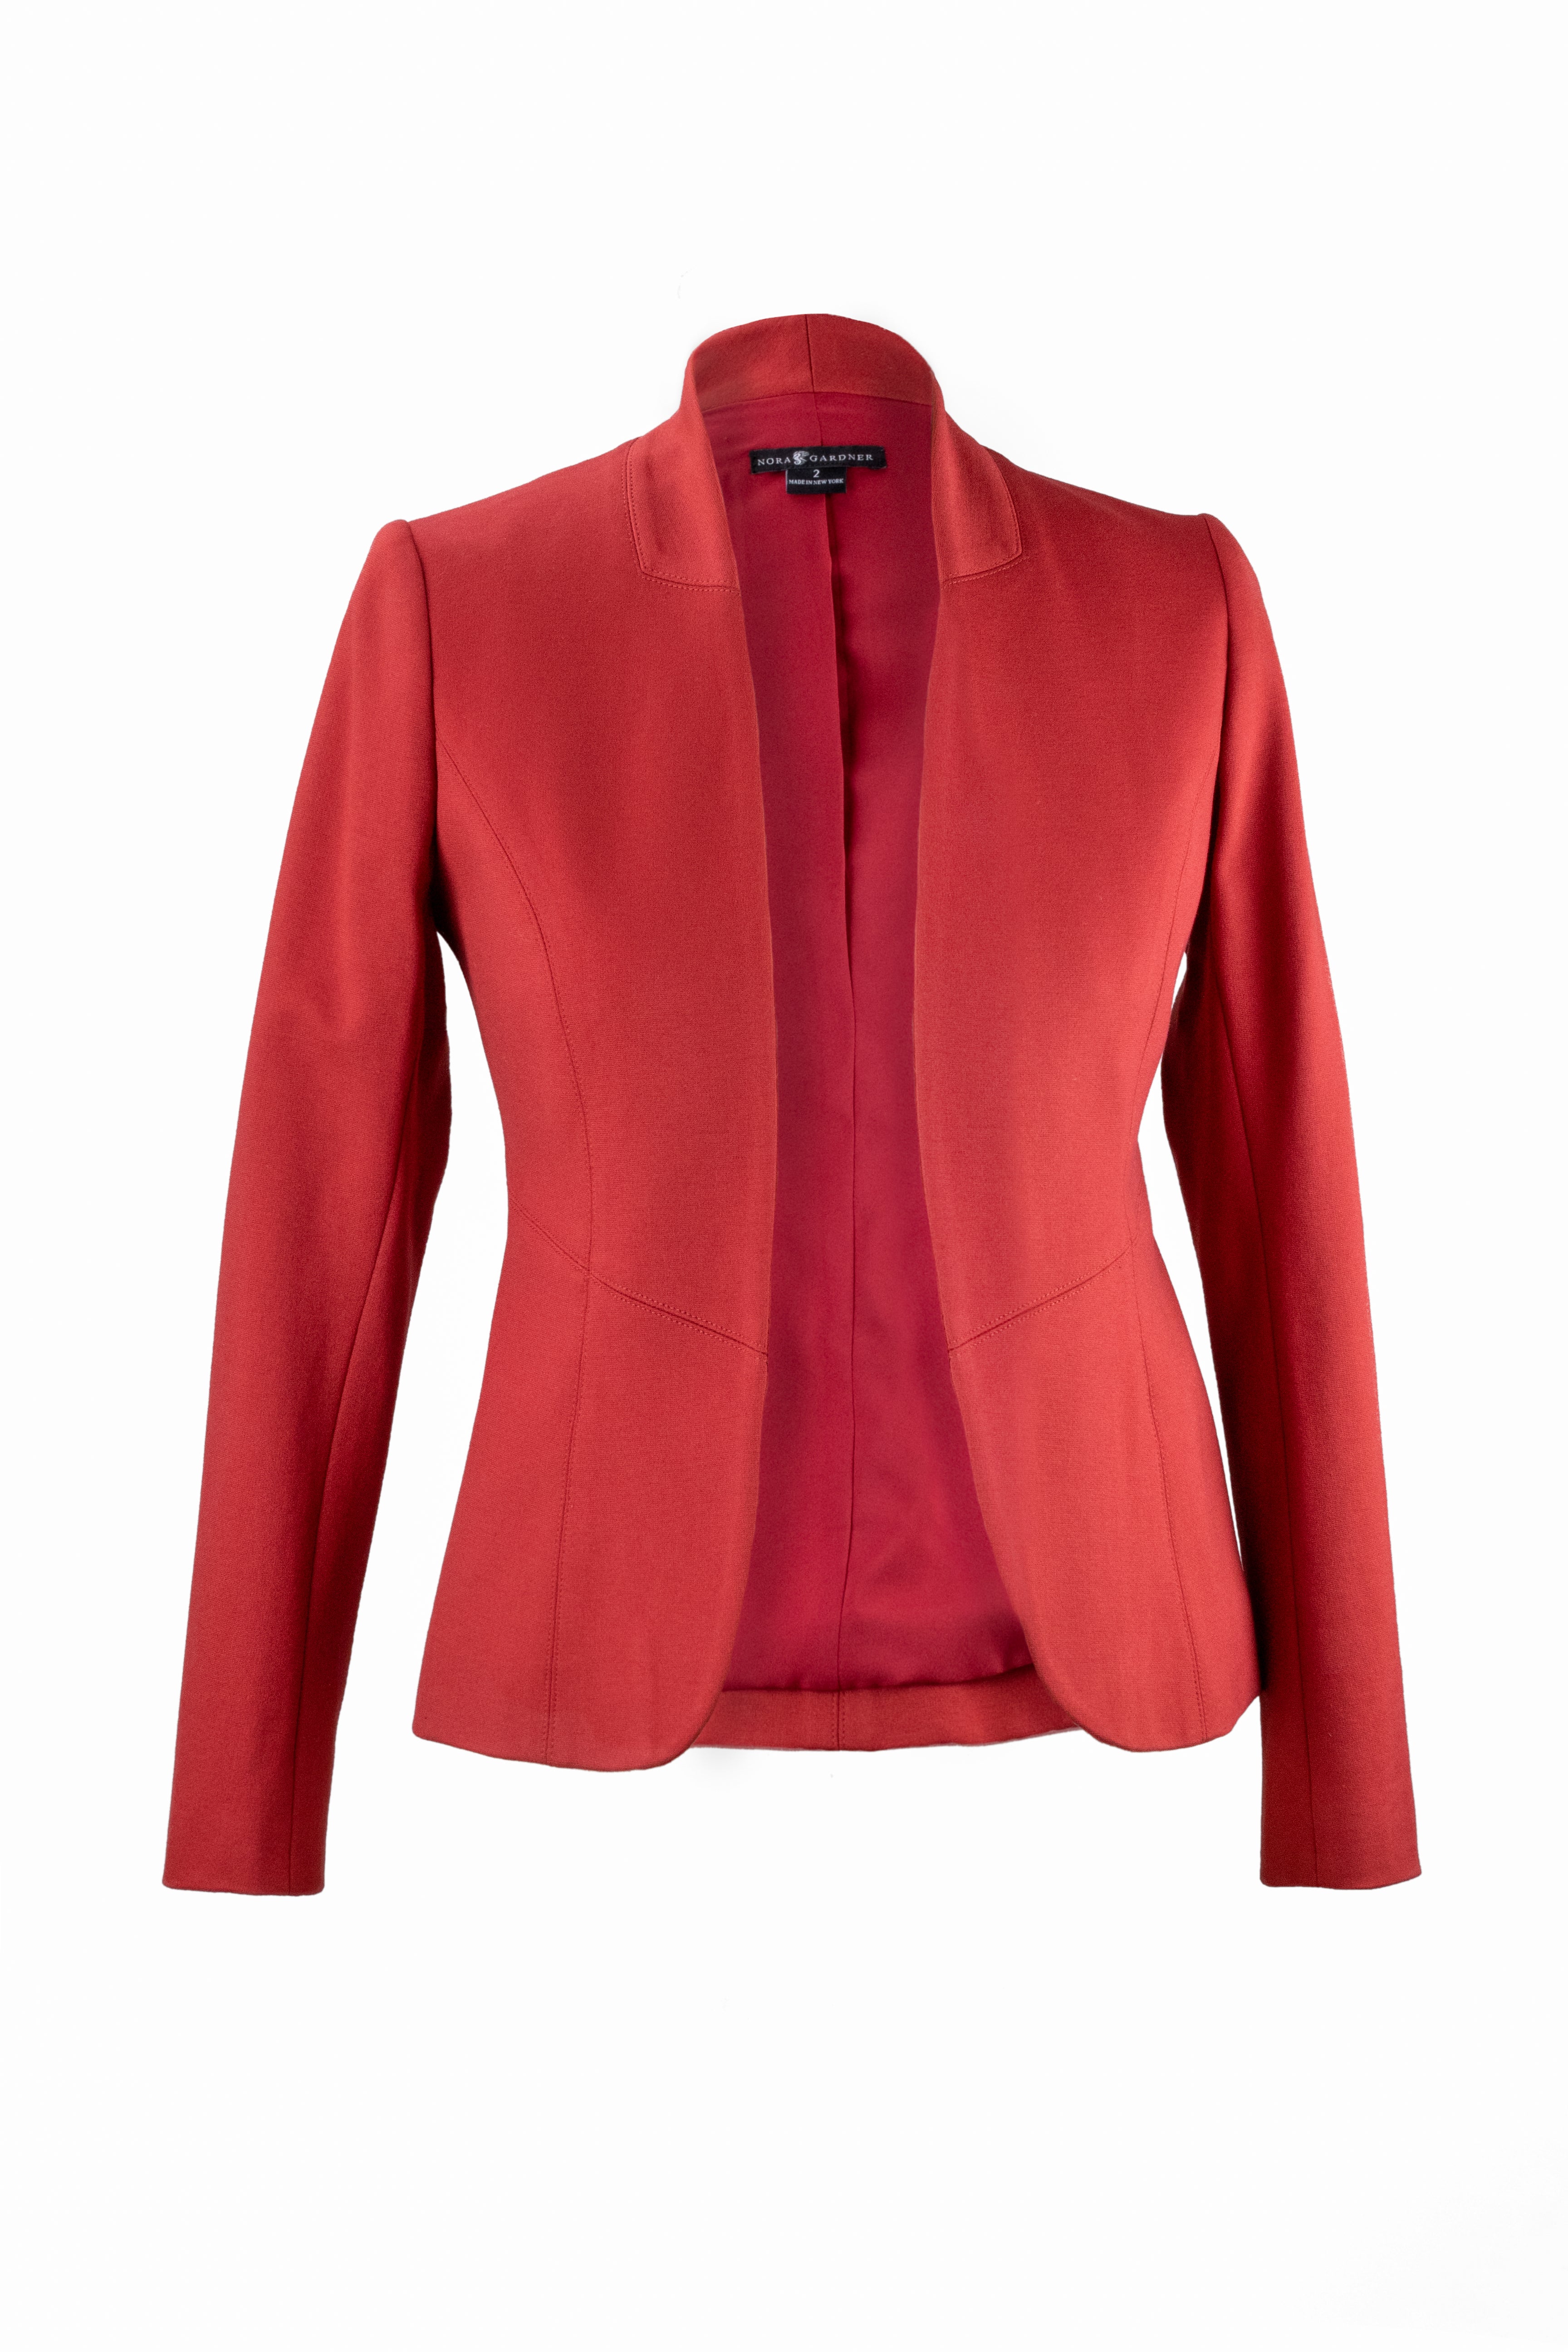 Women' Business Palermo Jacket - Fire Brick NORA GARDNER | OFFICIAL STORE for work and office